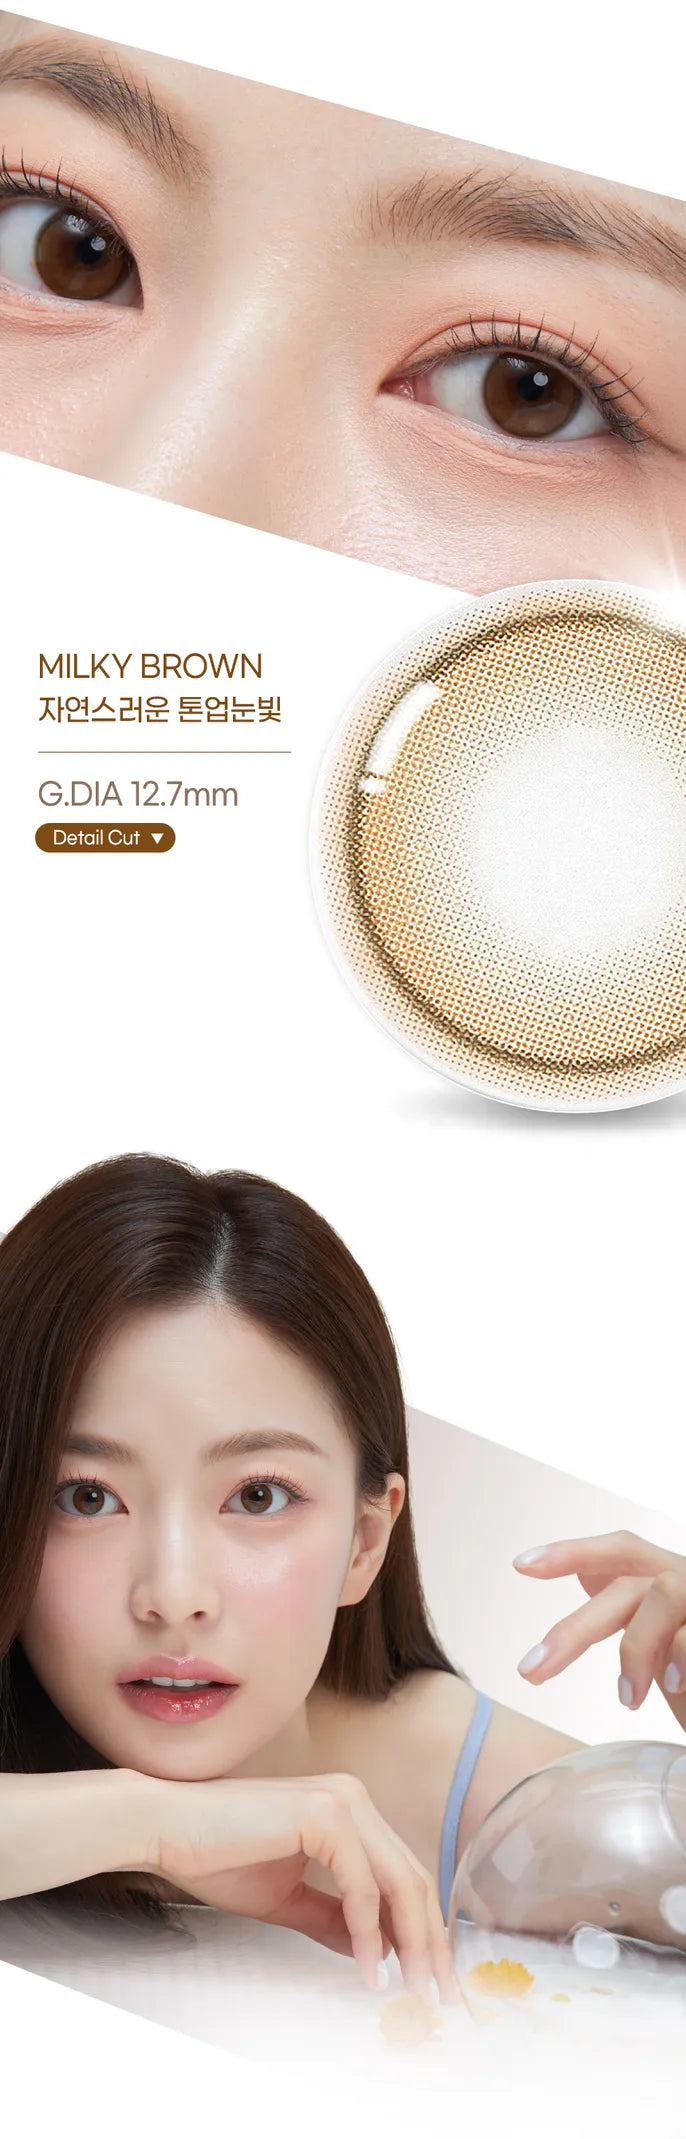 O-Lens Shine Touch Milky Brown | Daily 5 Pairs